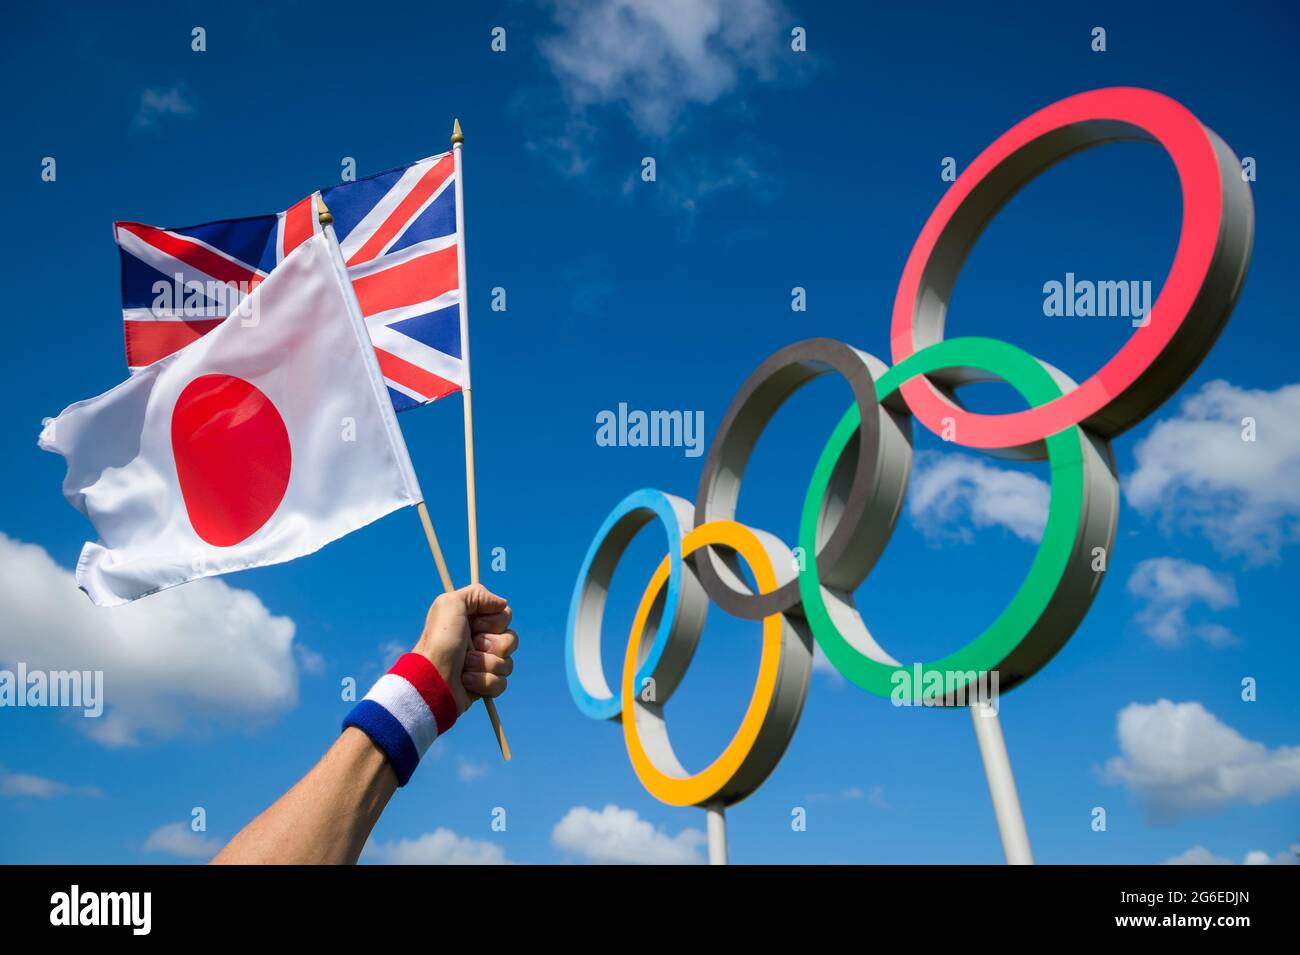 RIO DE JANEIRO - MARCH, 2016: Athlete holds Japanese and UK flags together in front of a large set of Olympic Rings under bright blue sky. Stock Photo